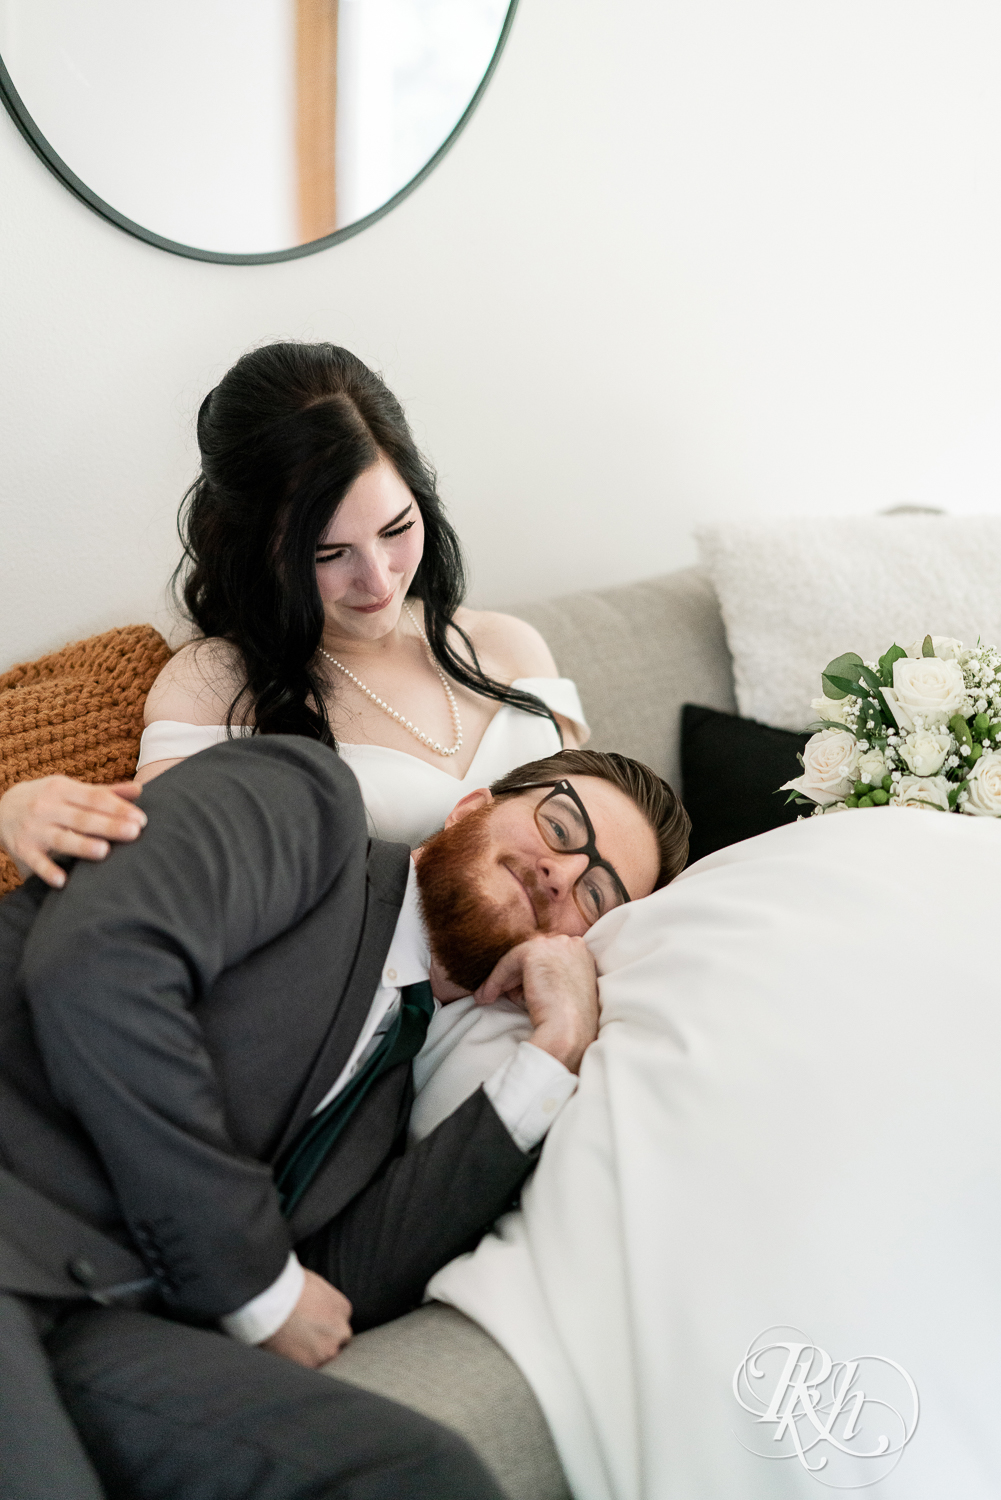 Groom lays on bride's lap on couch at their house wedding in Sartell, Minnesota.